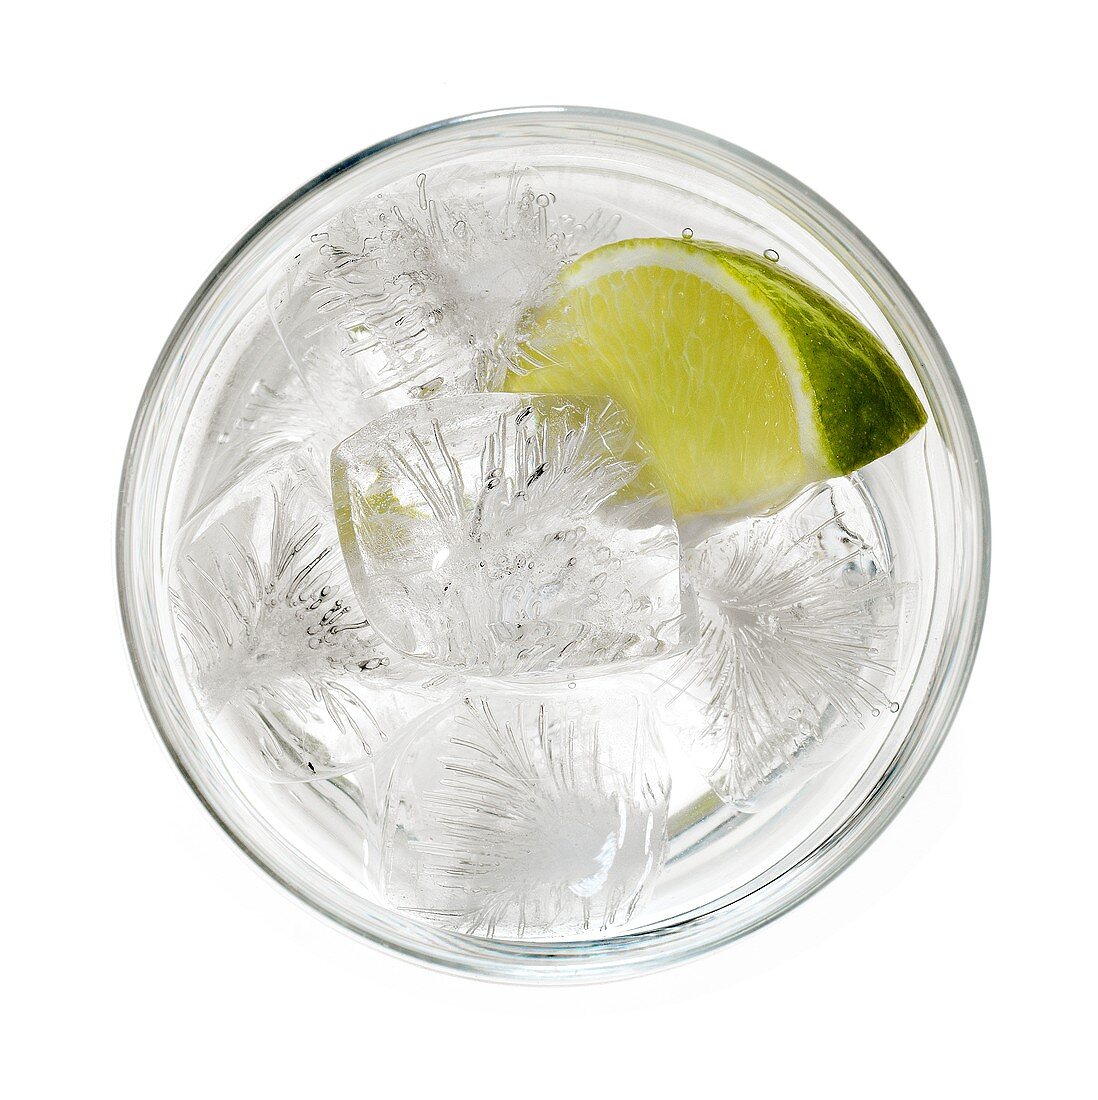 A glass of water with lime and ice cubes